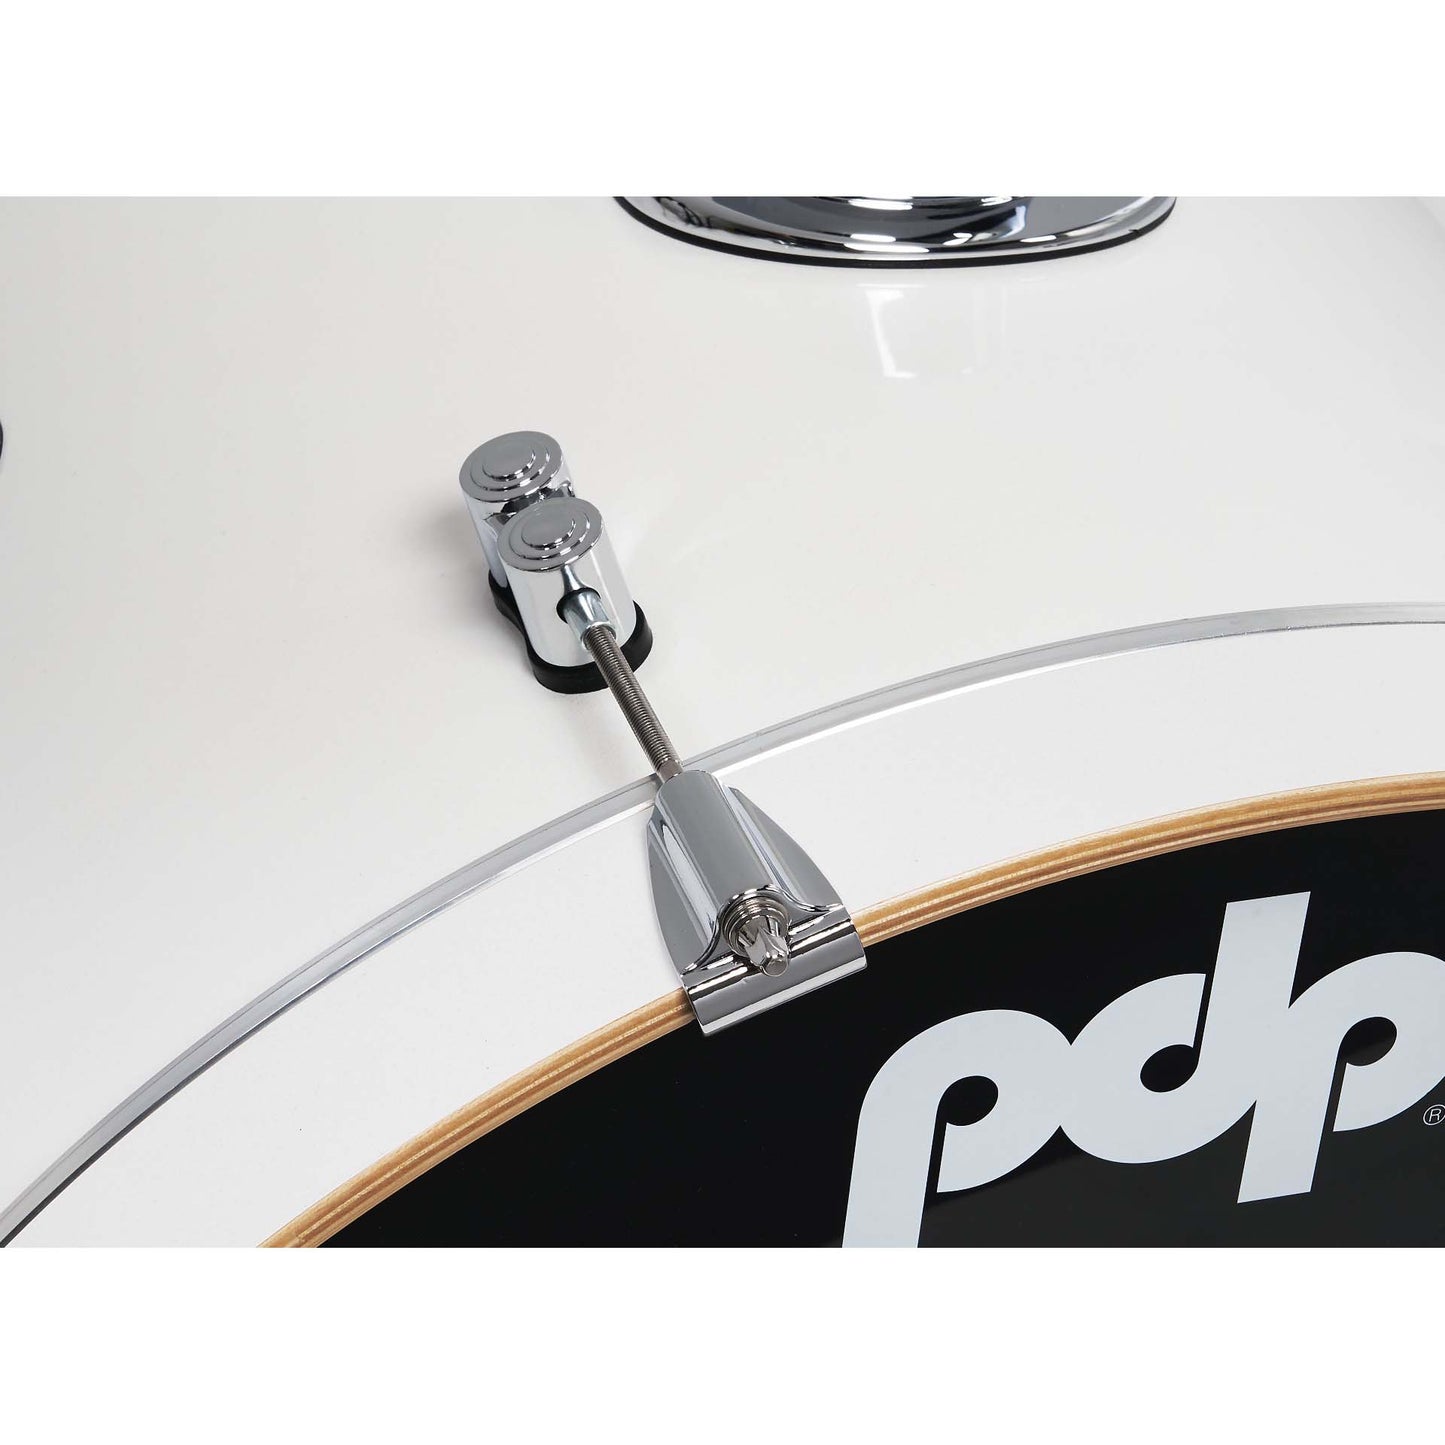 Pacific Drums & Percussion Concept Maple 5-Piece Shell Pack - Pearlescent White